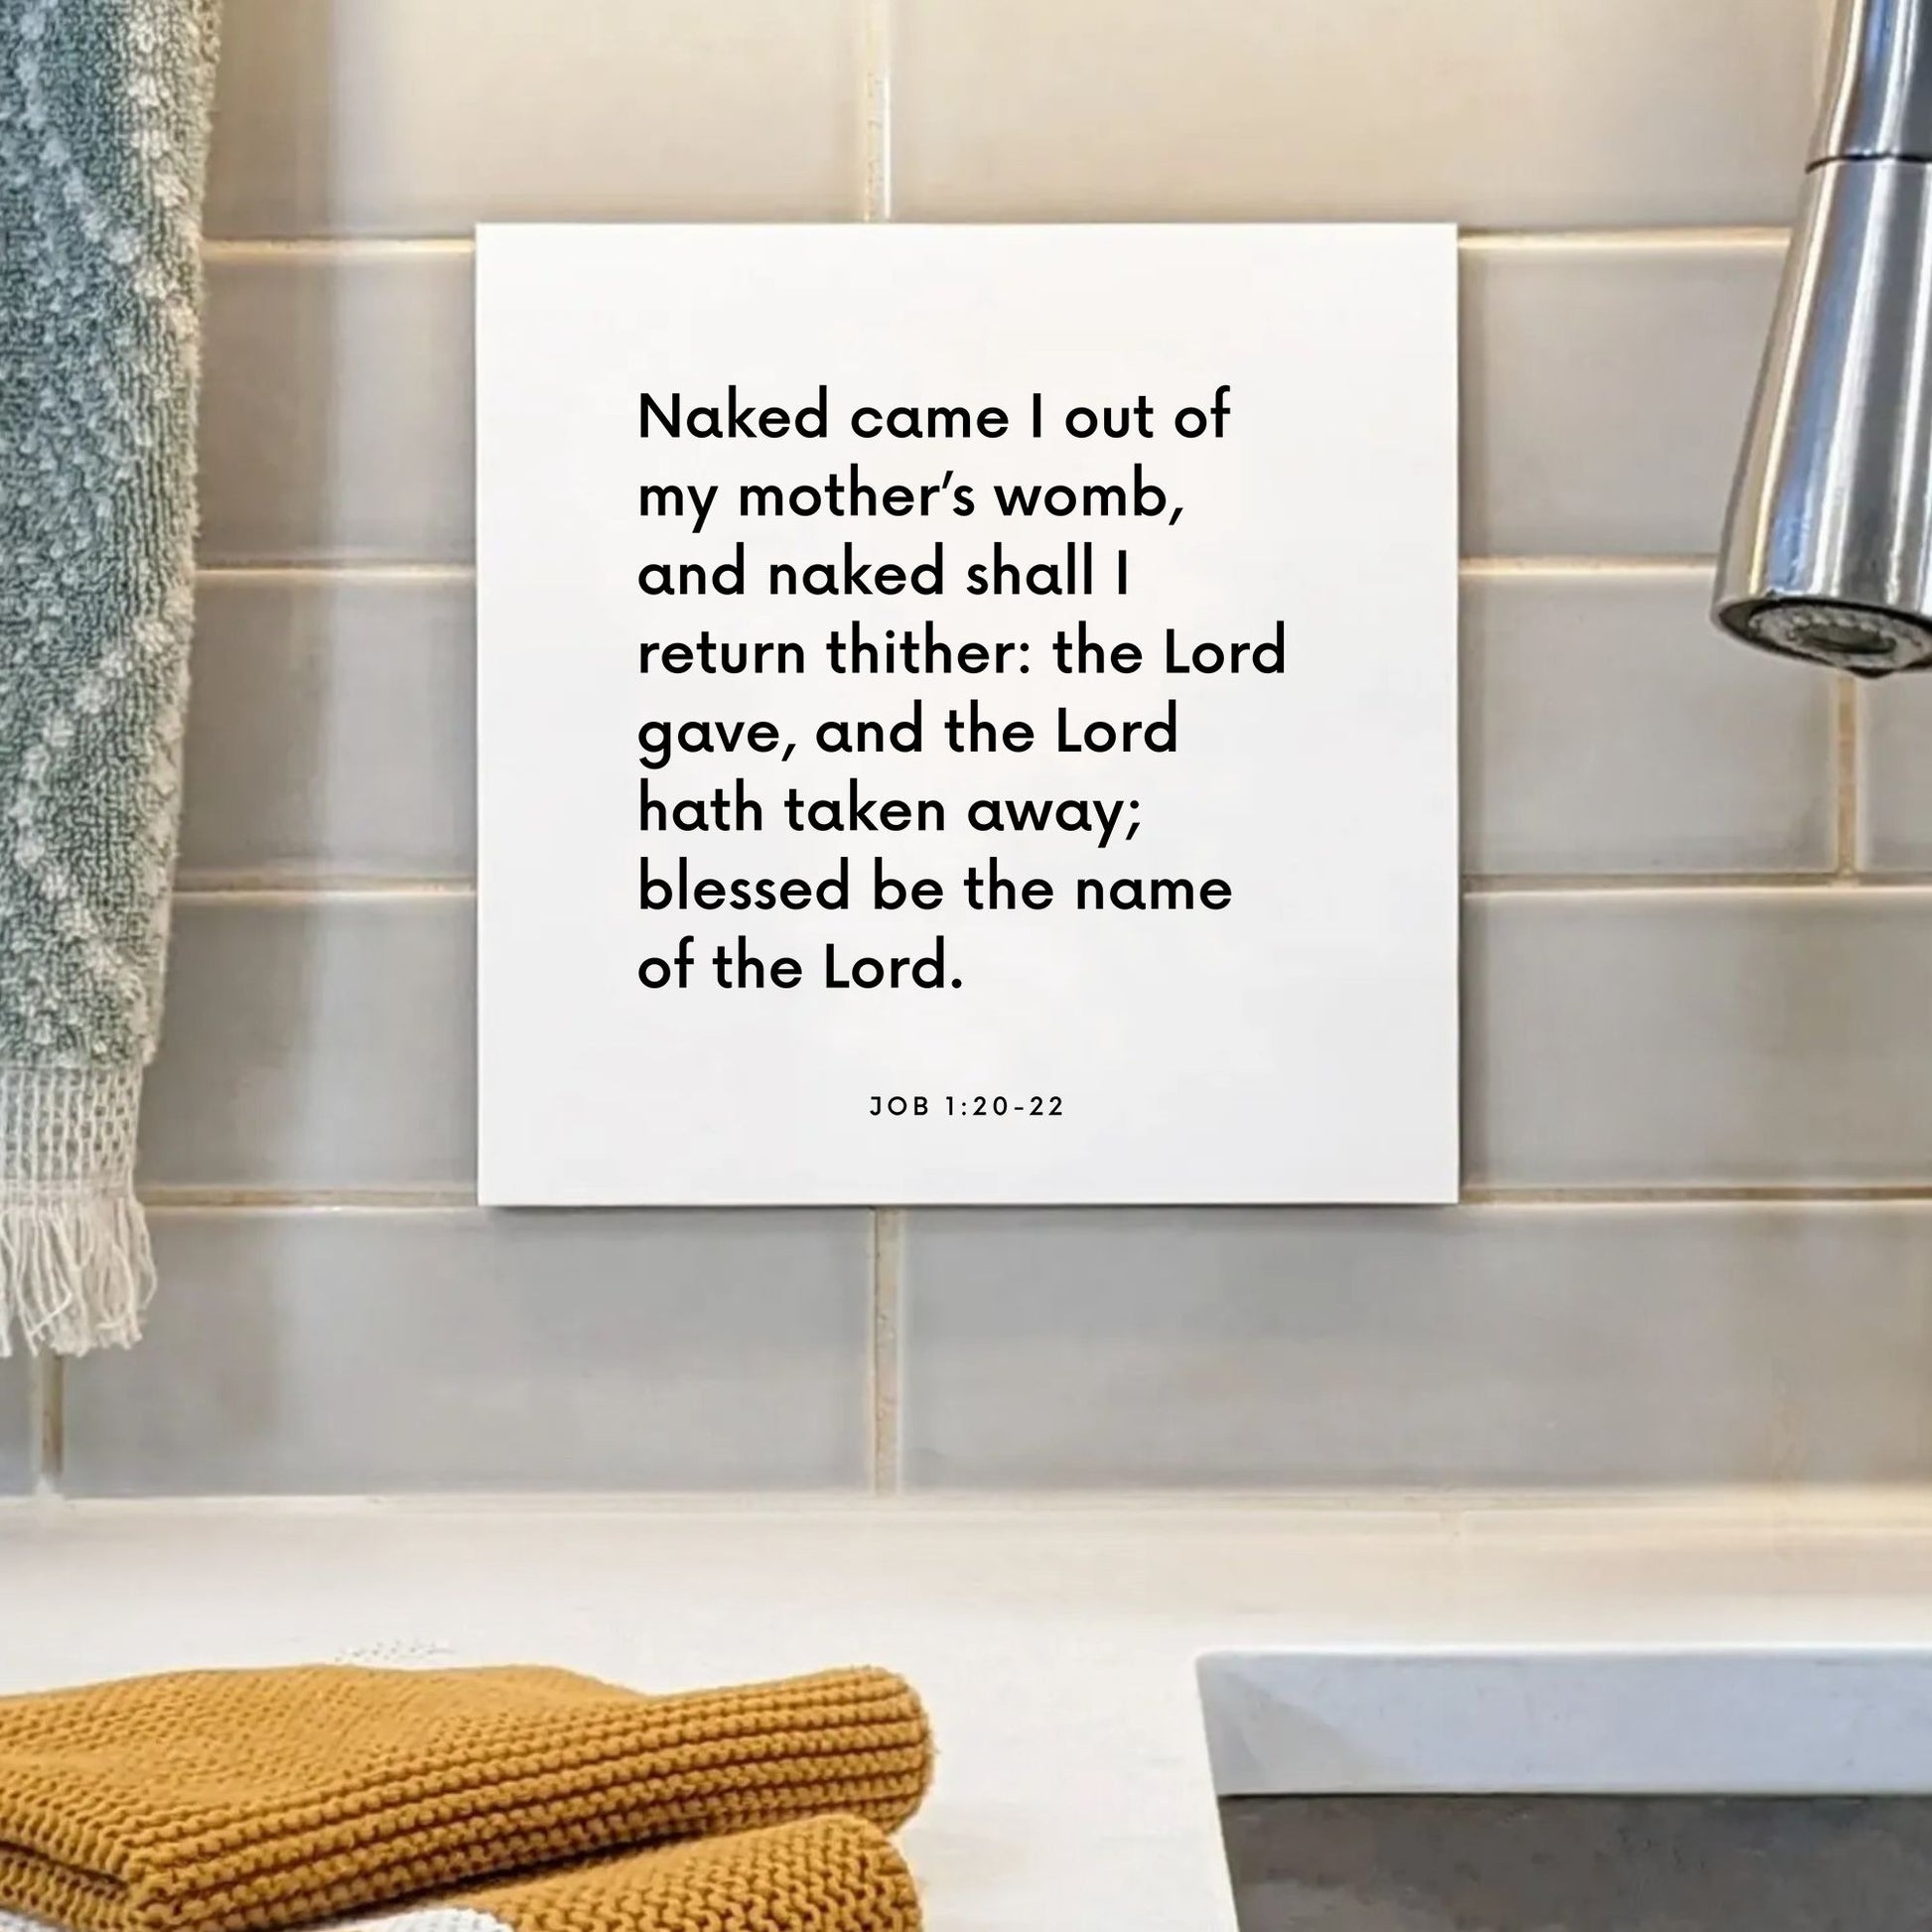 Sink mouting of the scripture tile for Job 1:20-22 - "Naked came I out of my mother’s womb, naked shall I return"